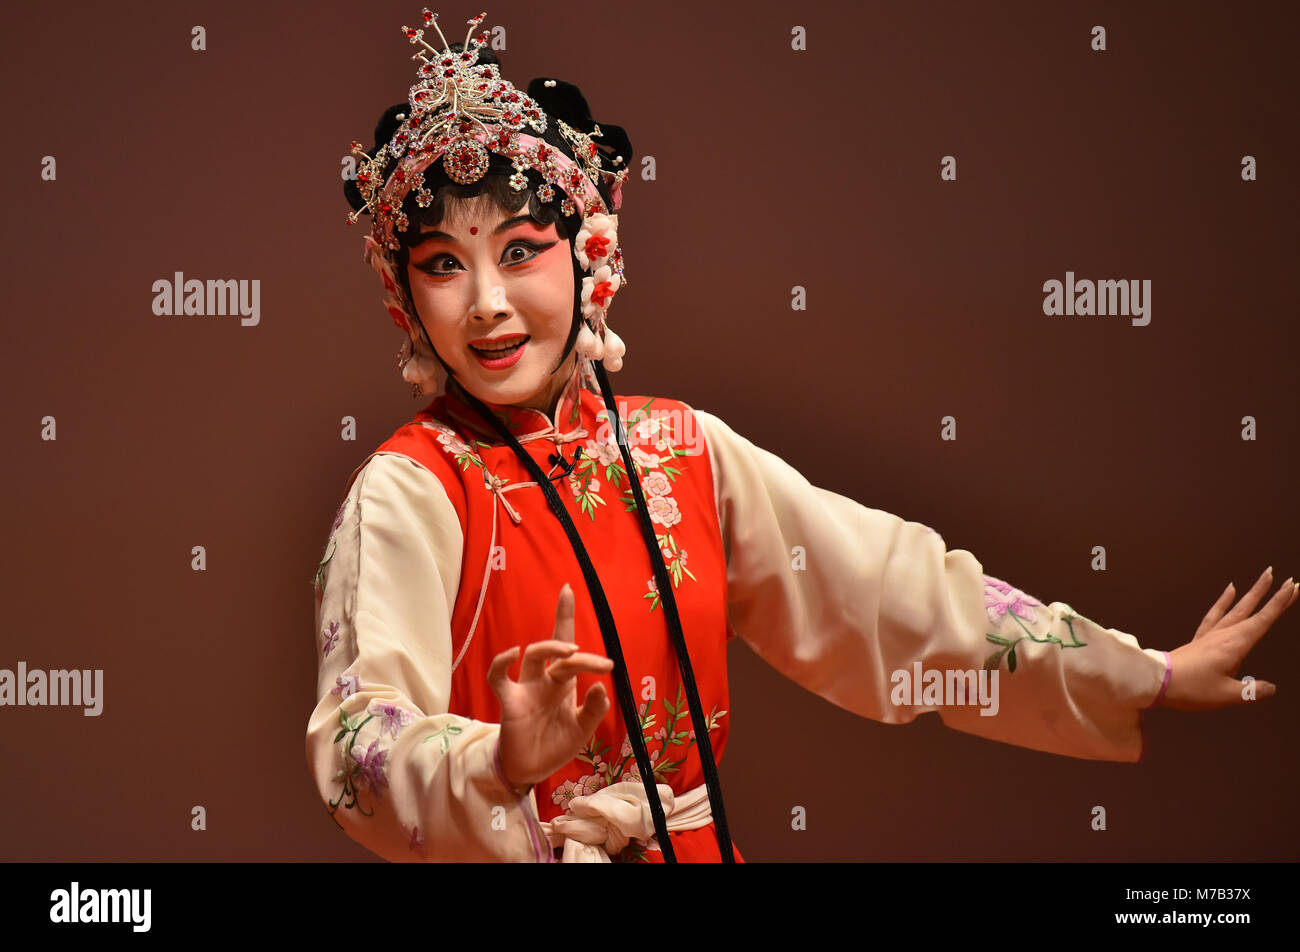 Hong Kong. 9th Mar, 2018. A performer from the Suzhou Kunqu Opera Theatre makes stage demonstration during a lecture titled 'Love and Beauty of Kunqu Opera' given by renowned writer Pai Hsien-yung at City University of Hong Kong in south China's Hong Kong Special Administrative Region, March 9, 2018. Pai is most famous for a number of fiction works including 'Taipei People' and 'Crystal Boys'. A great fan of the Chinese Kunqu Opera, he has also committed himself to preserving and promoting this traditional art form worldwide. Credit: Wang Xi/Xinhua/Alamy Live News Stock Photo